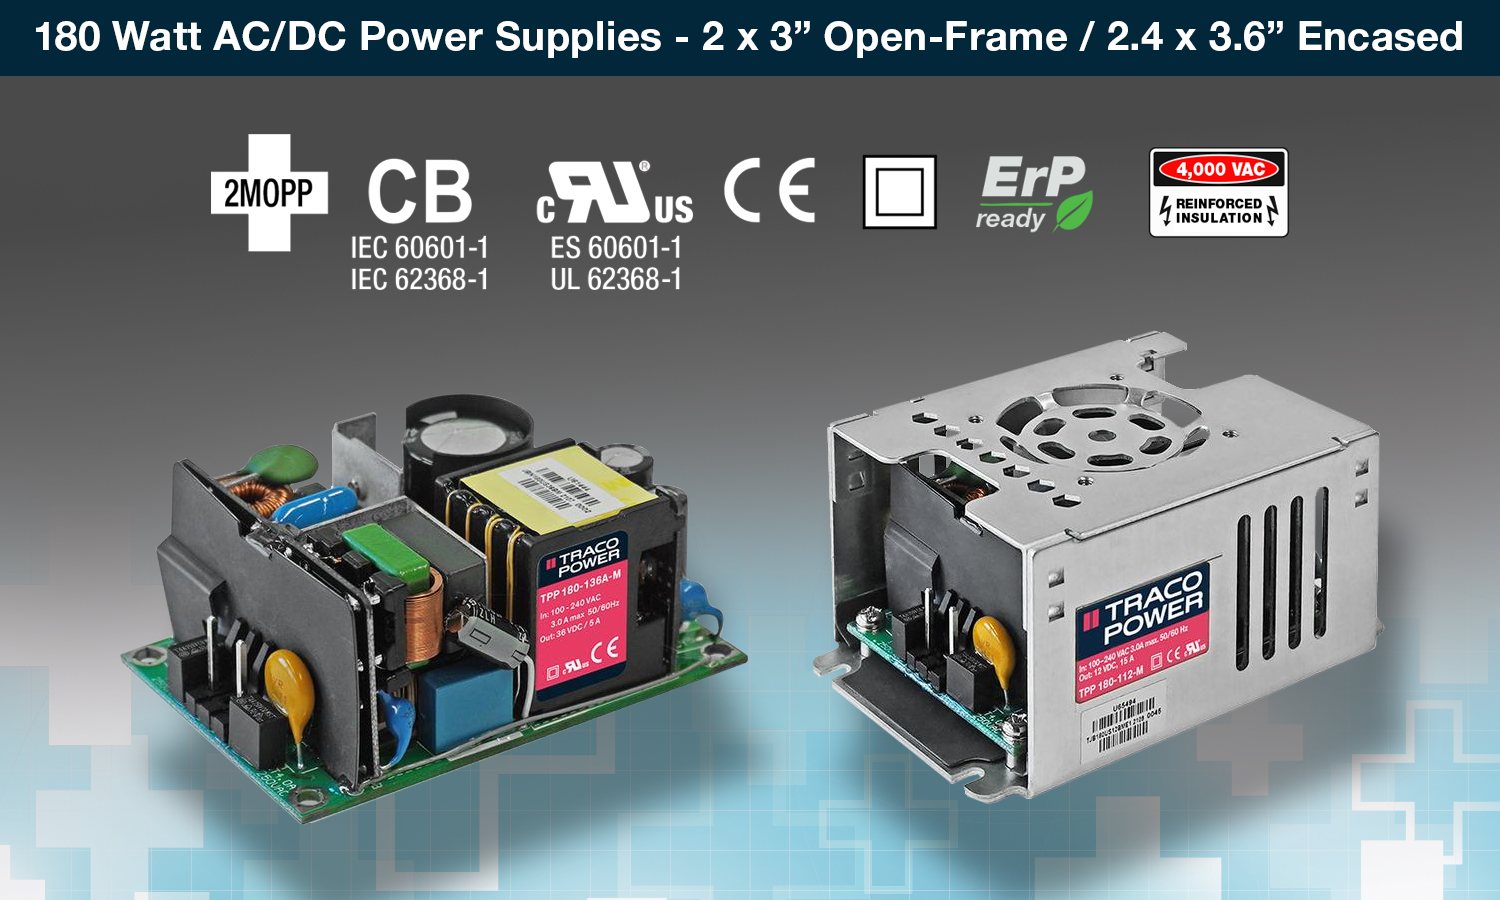 Traco power supplies